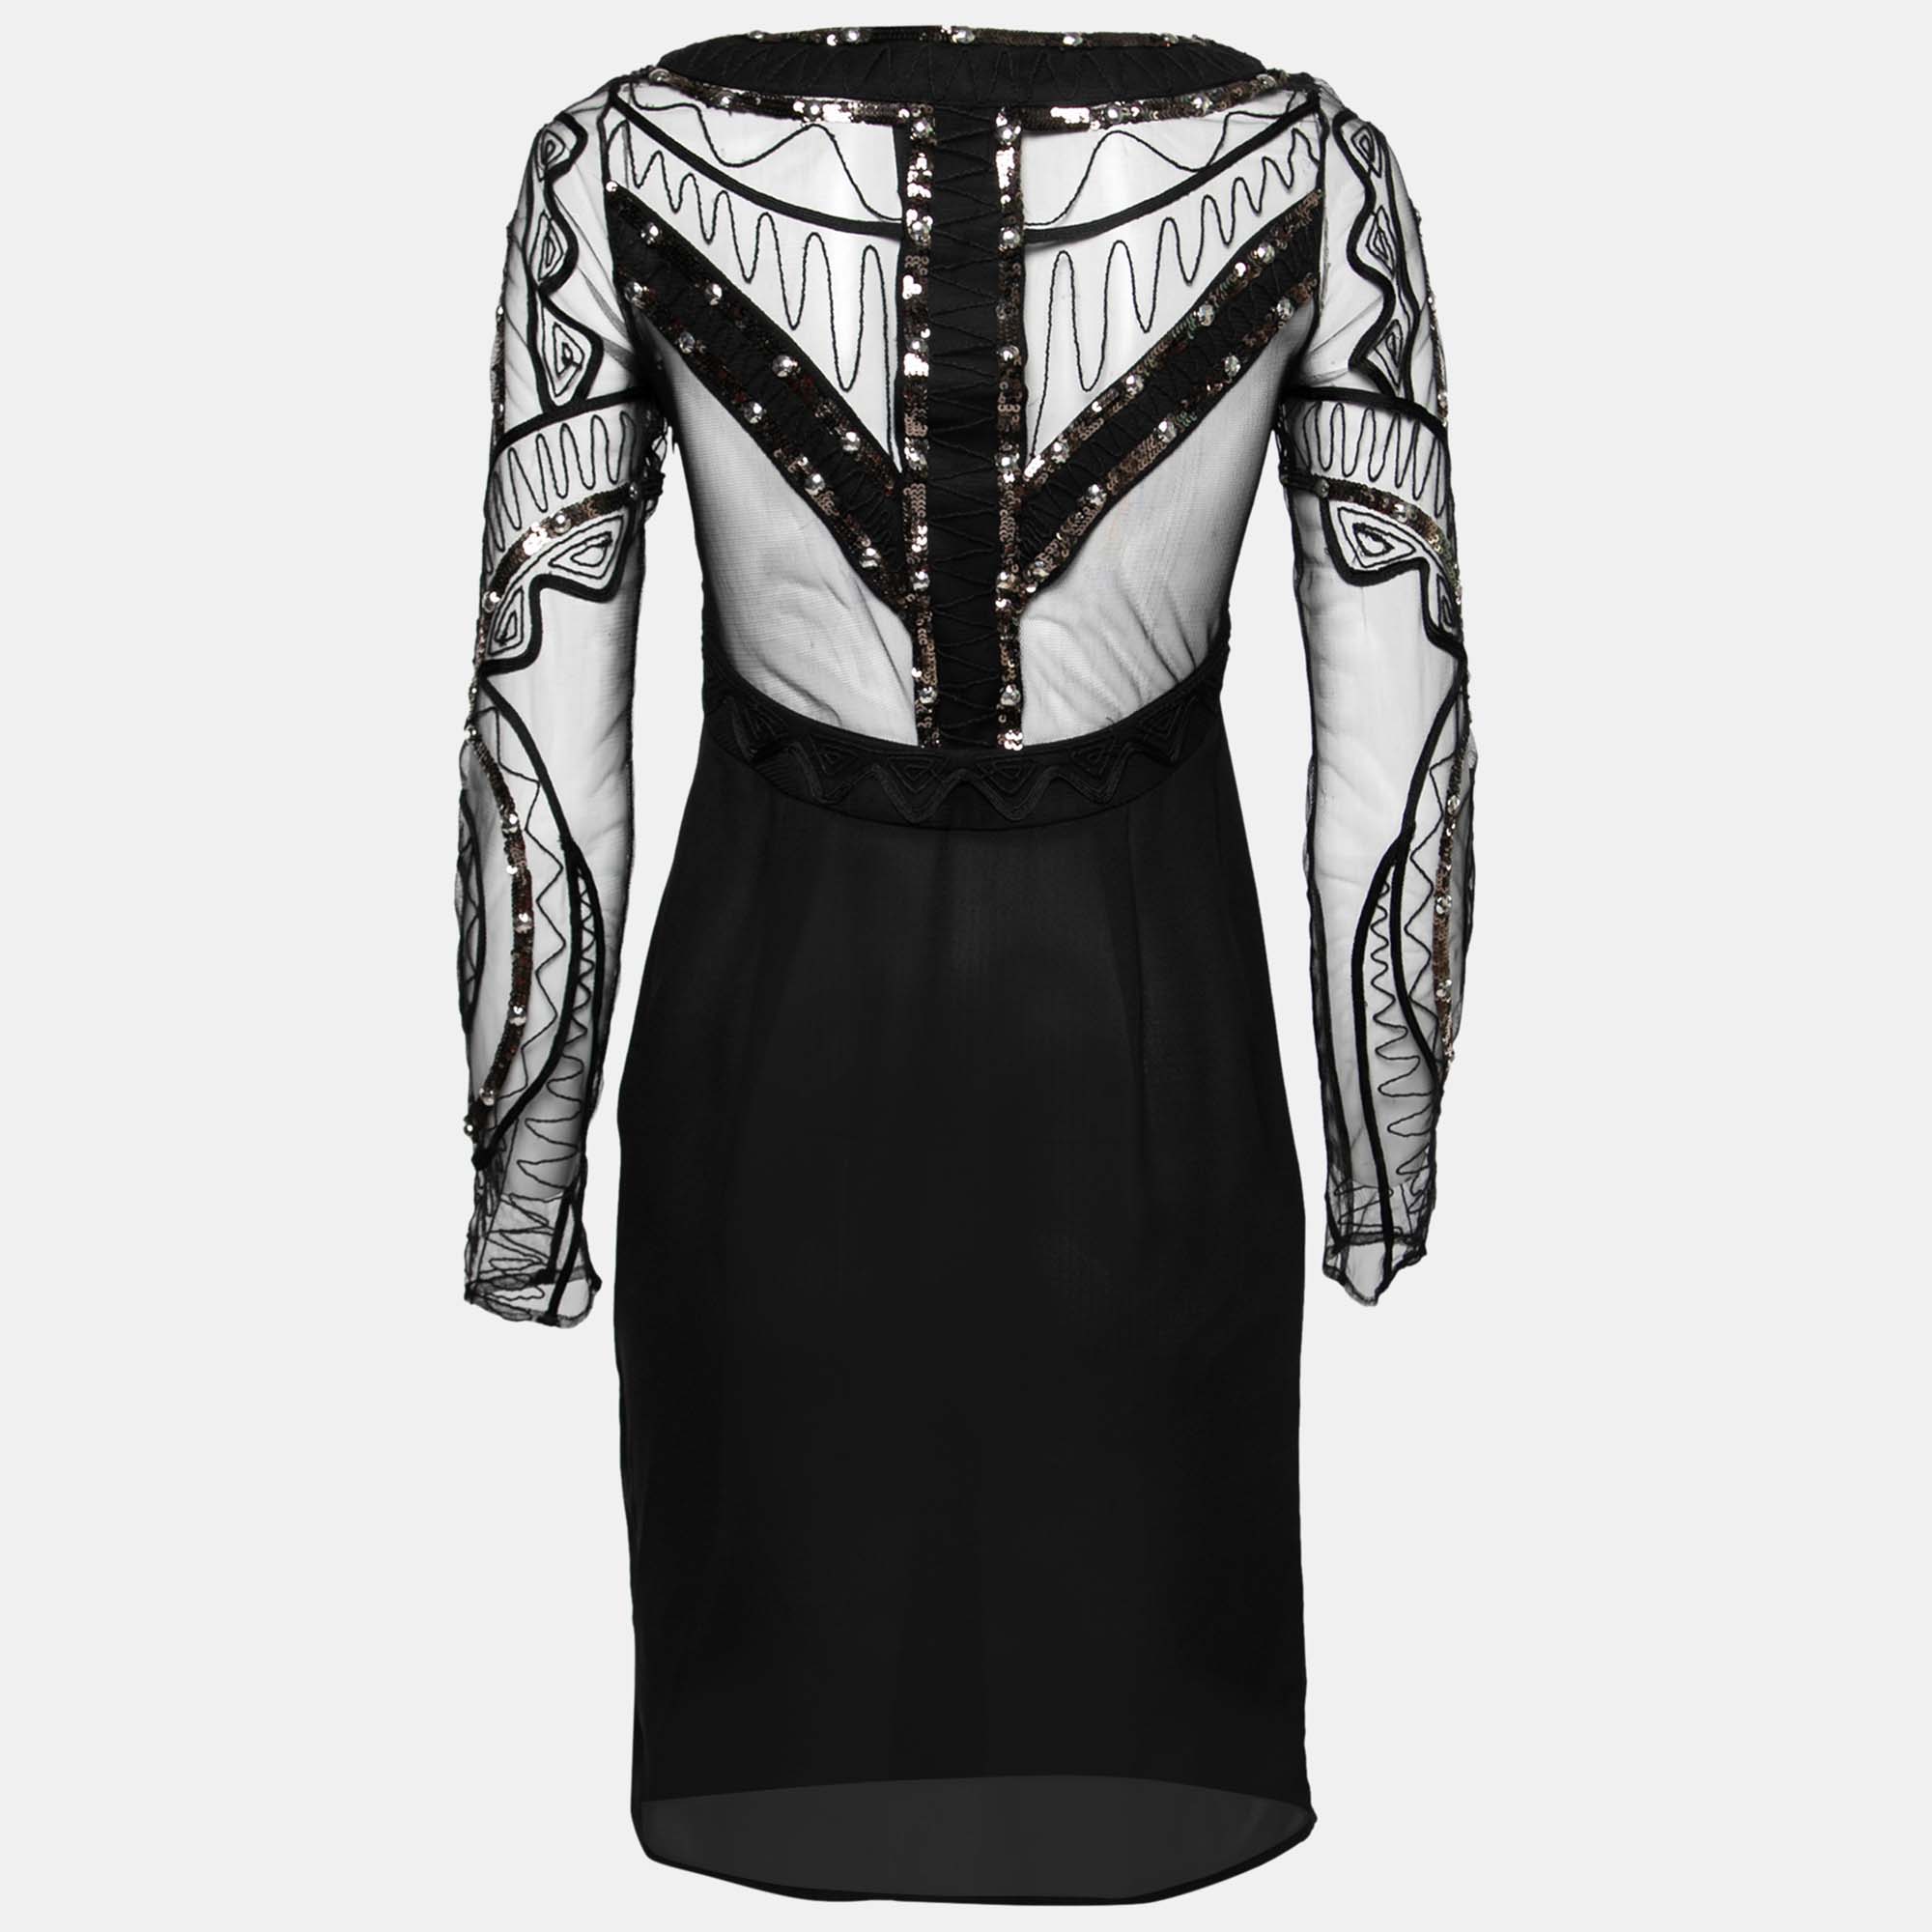 

Alice by Temperley Sheer Black Embellished Lace Bodice Pencil Dress